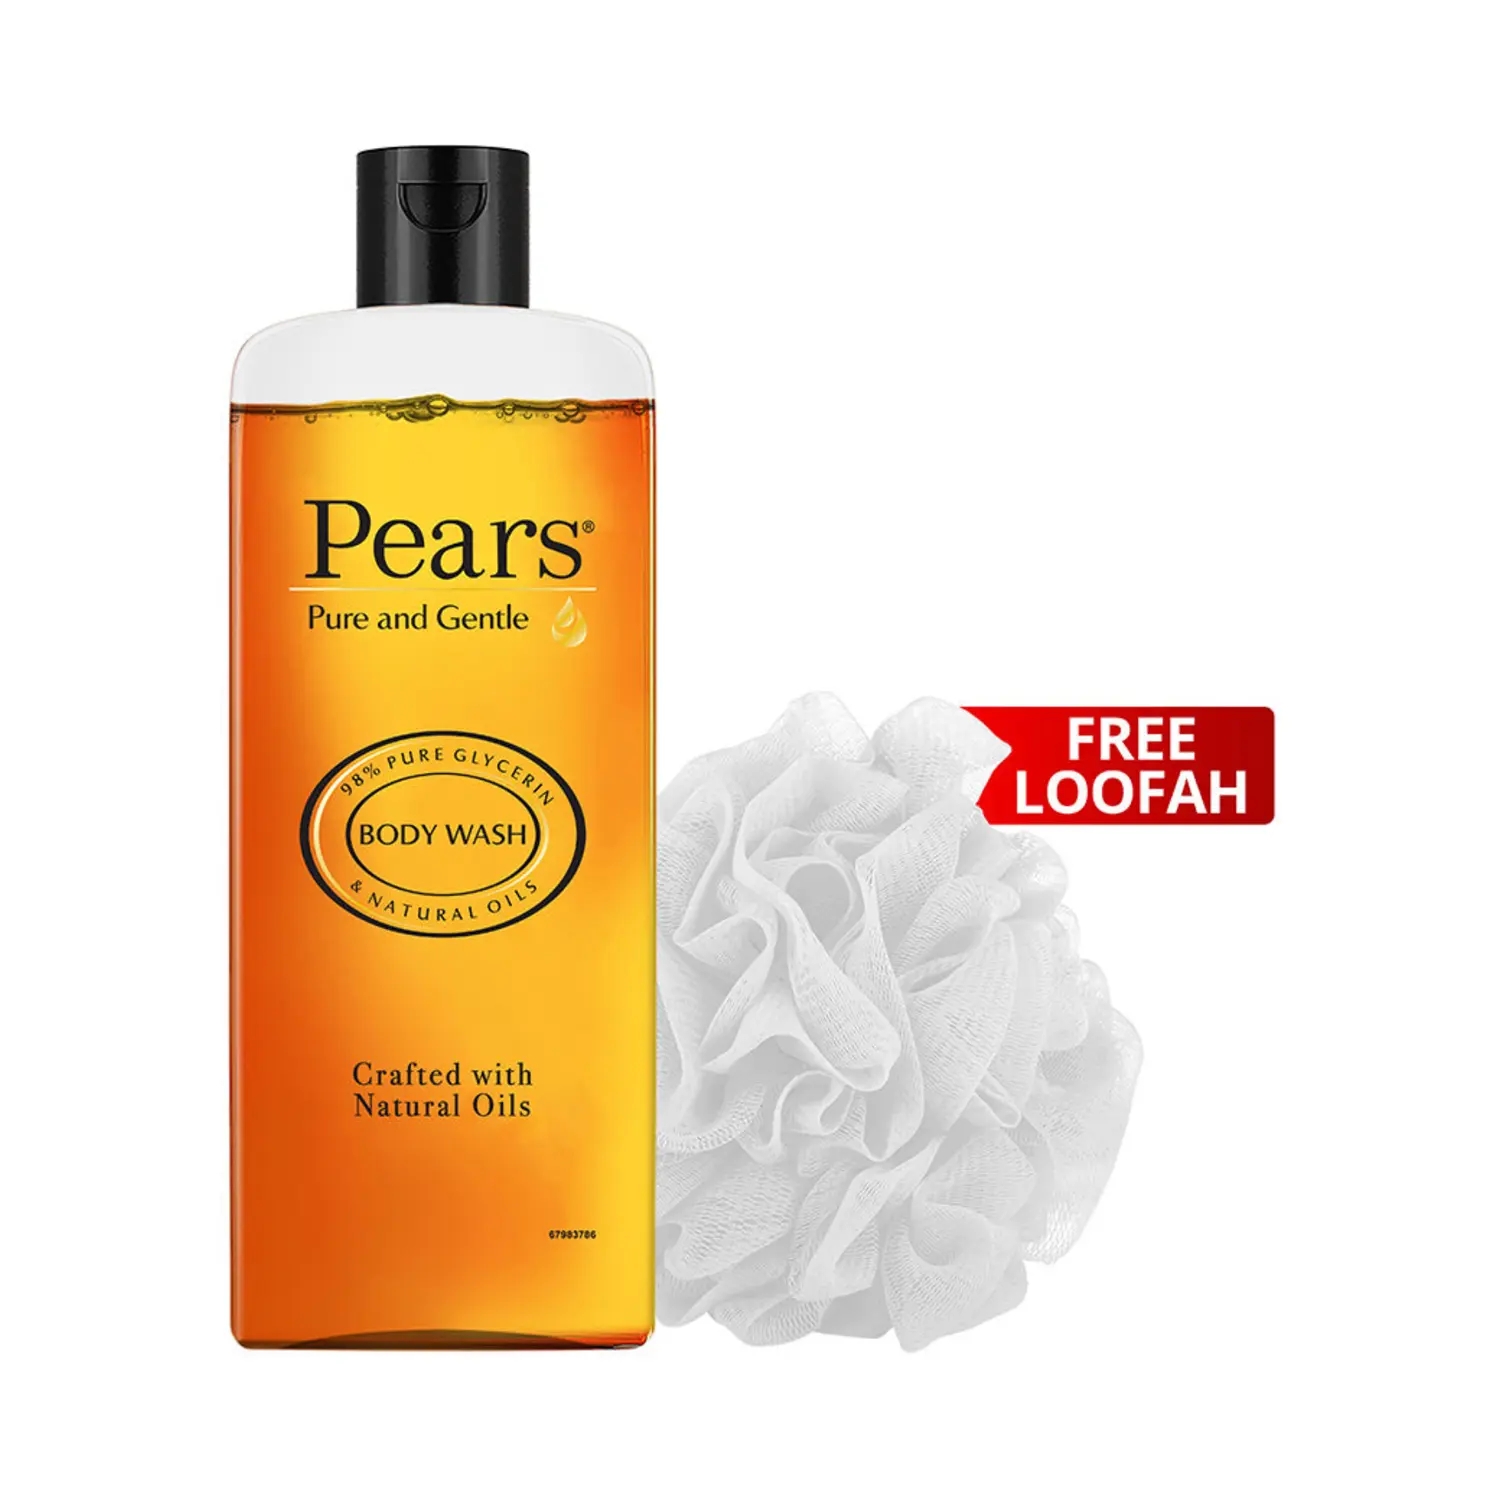 Pears | Pears Pure and Gentle Body Wash with Loofah (250ml)